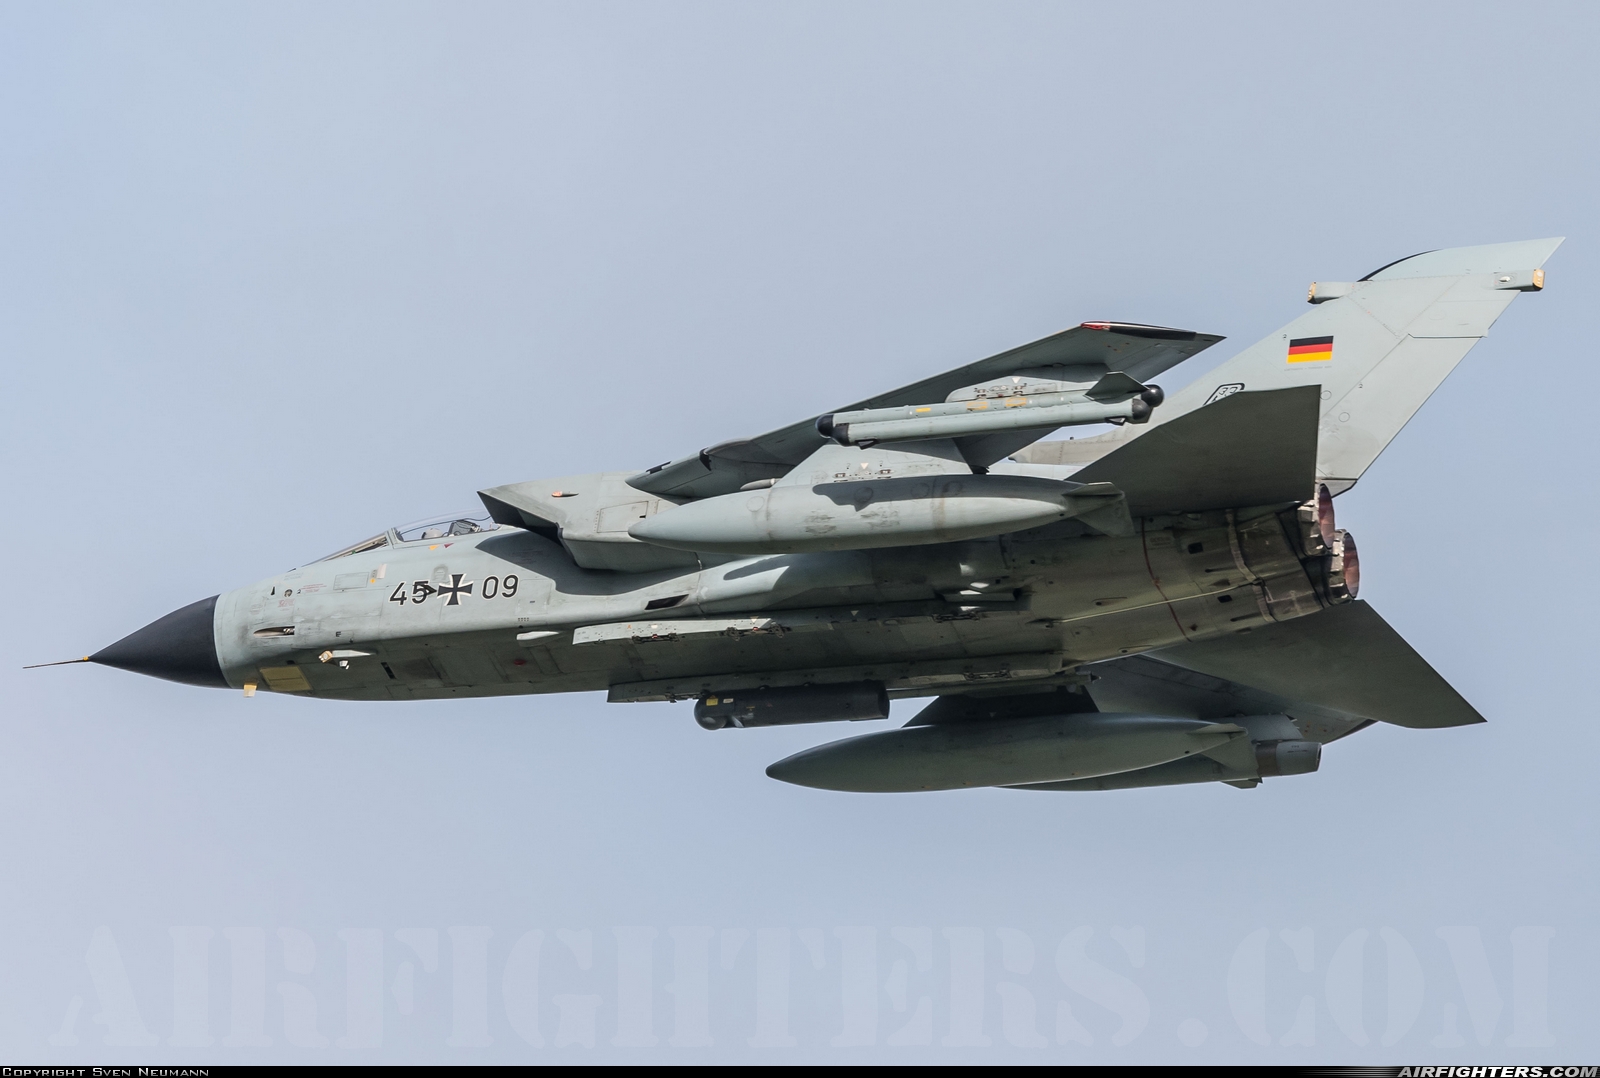 Germany - Air Force Panavia Tornado IDS 45+09 at Wittmundhafen (Wittmund) (ETNT), Germany